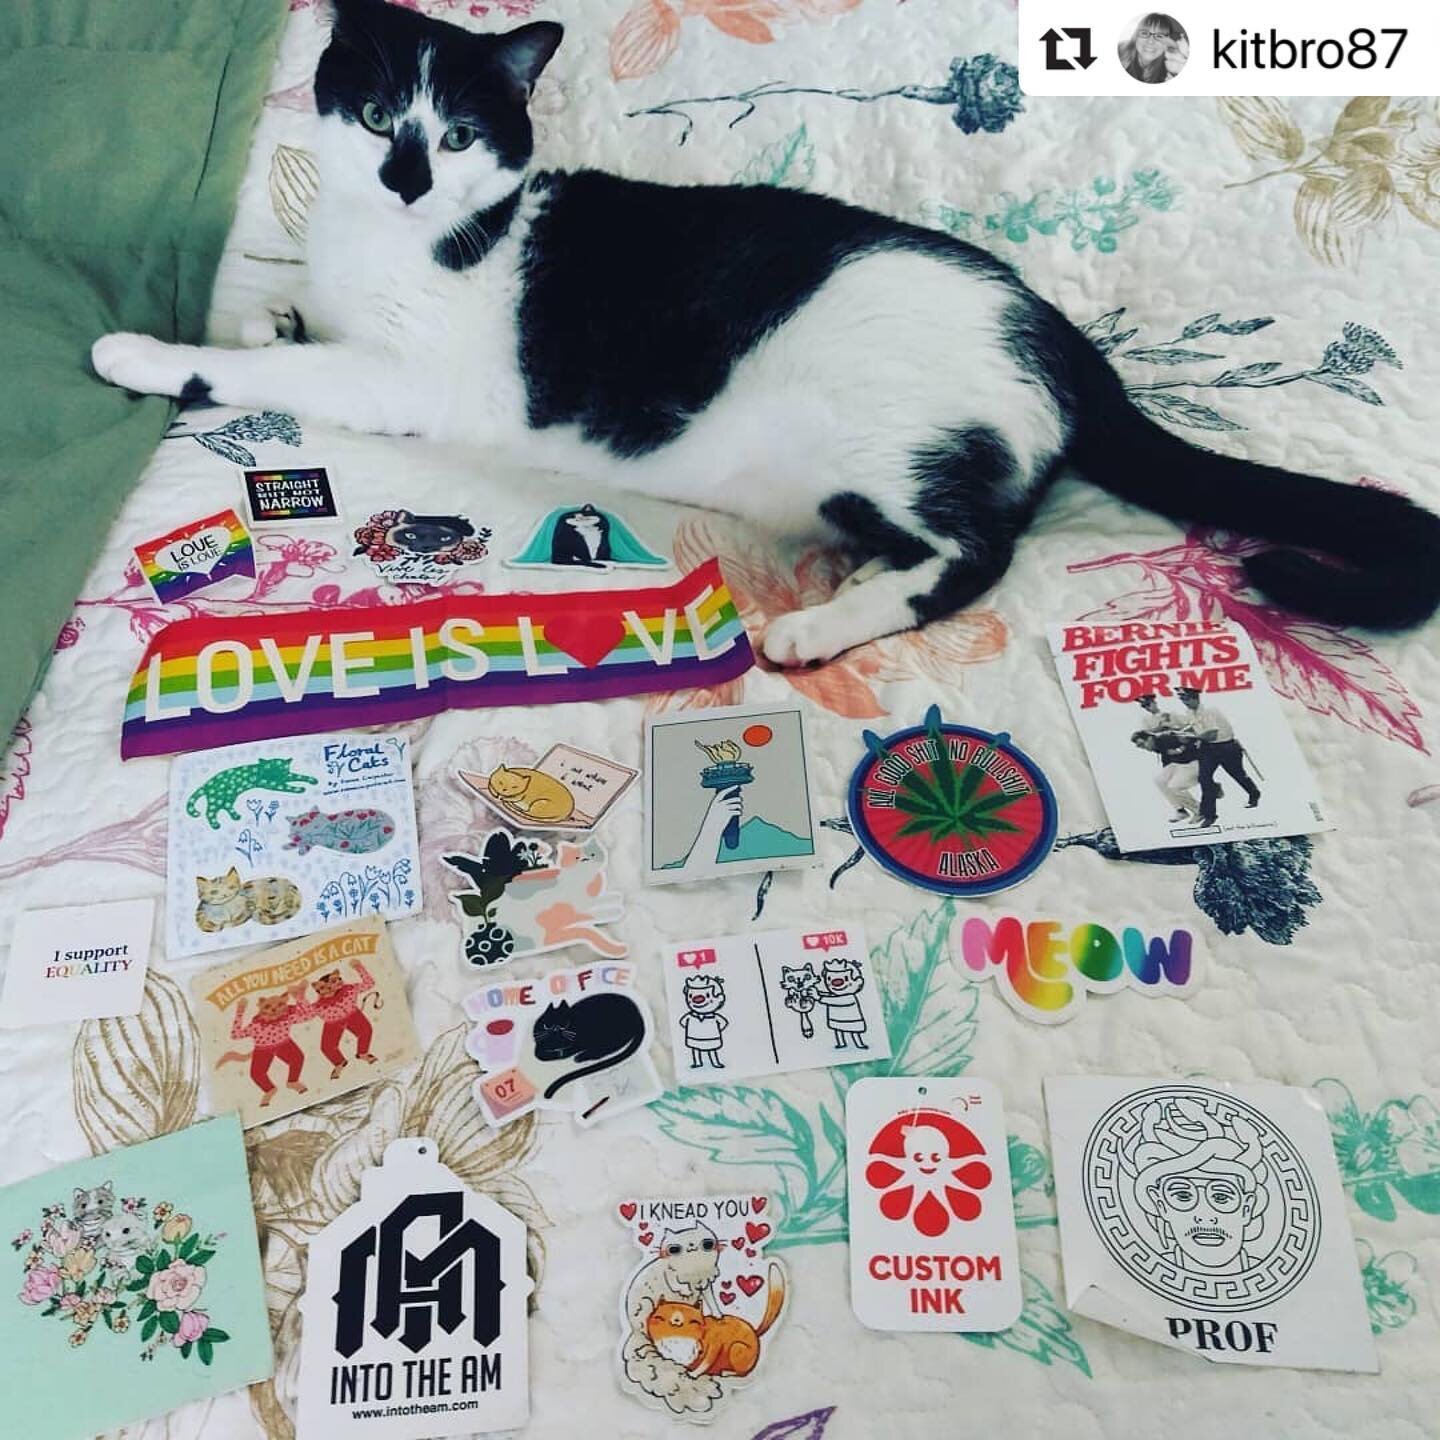 #Repost @kitbro87 with @make_repost
・・・
I panic too much to put my stickers on anything 😹 #ITAMFAM @intotheam @cat_sticker_club